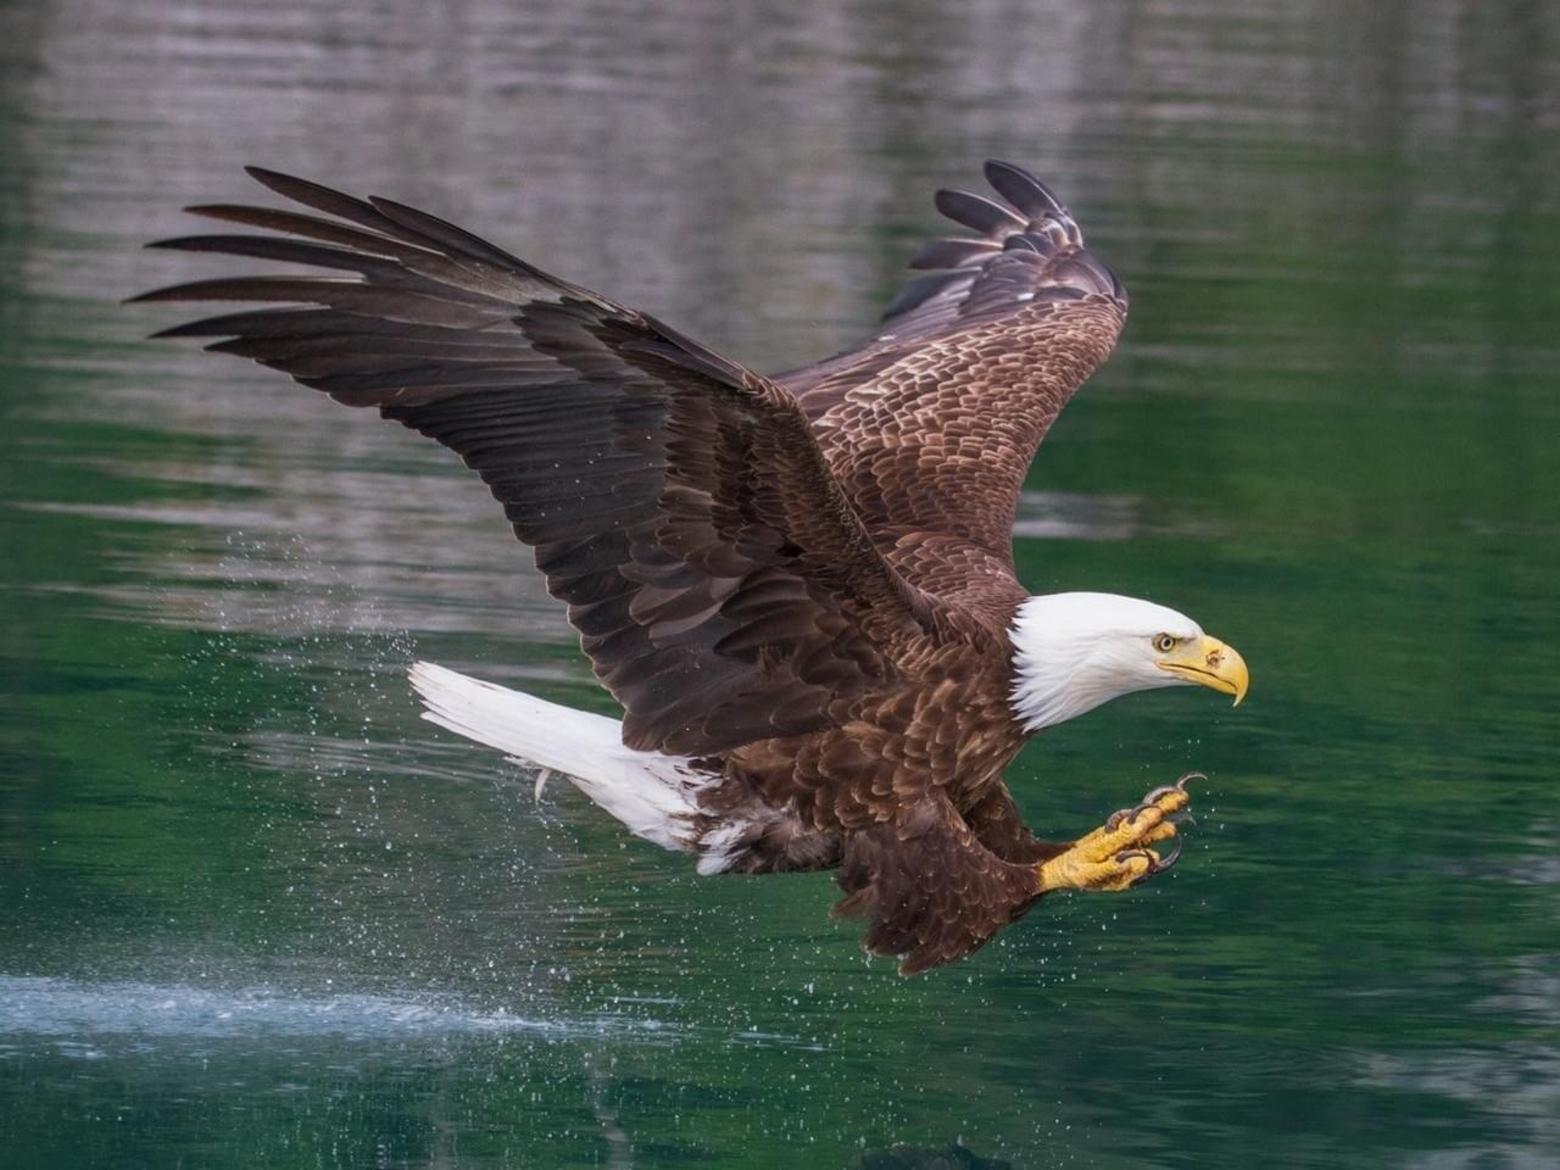 With a wingspan of up to eight feet, bald eagles are a massive raptor and have been the national emblem of America since 1782. In 1963, only 417 nesting pairs existed in the U.S. They began recovering in the 1970s after DDT was banned and they were listed under the Endangered Species Act. Photo by Scott Heidorn/NPS